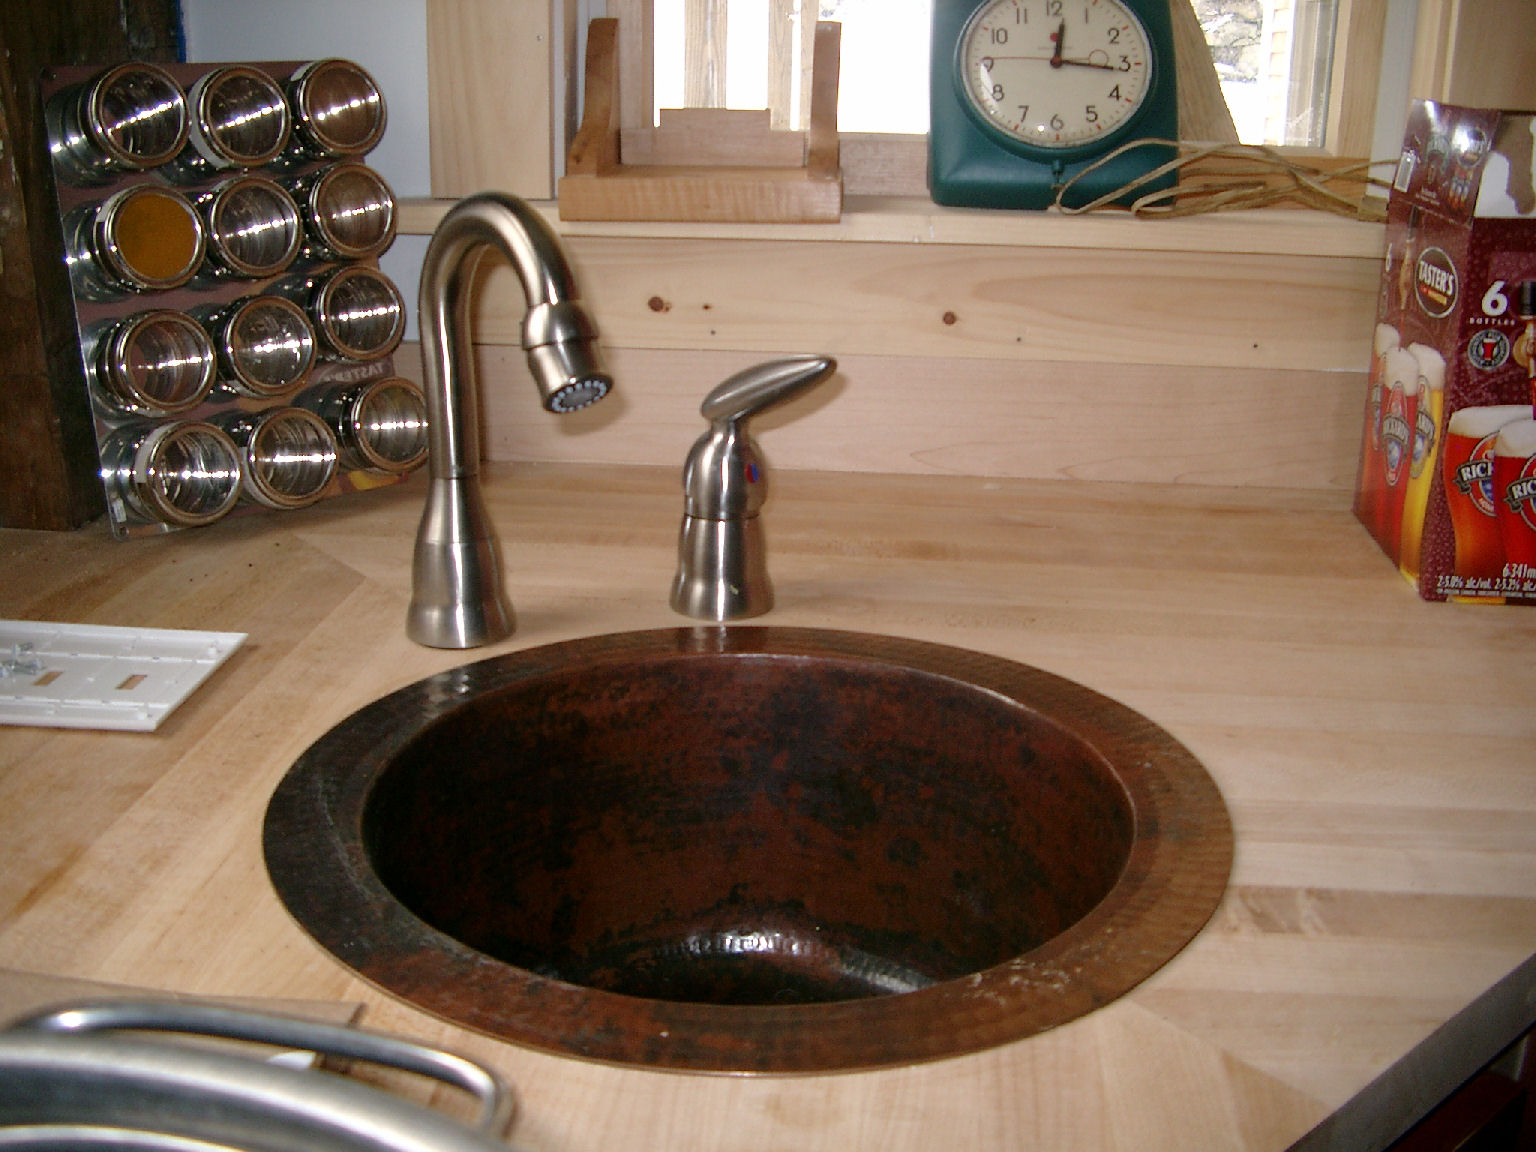 a sink with the faucet running at the top